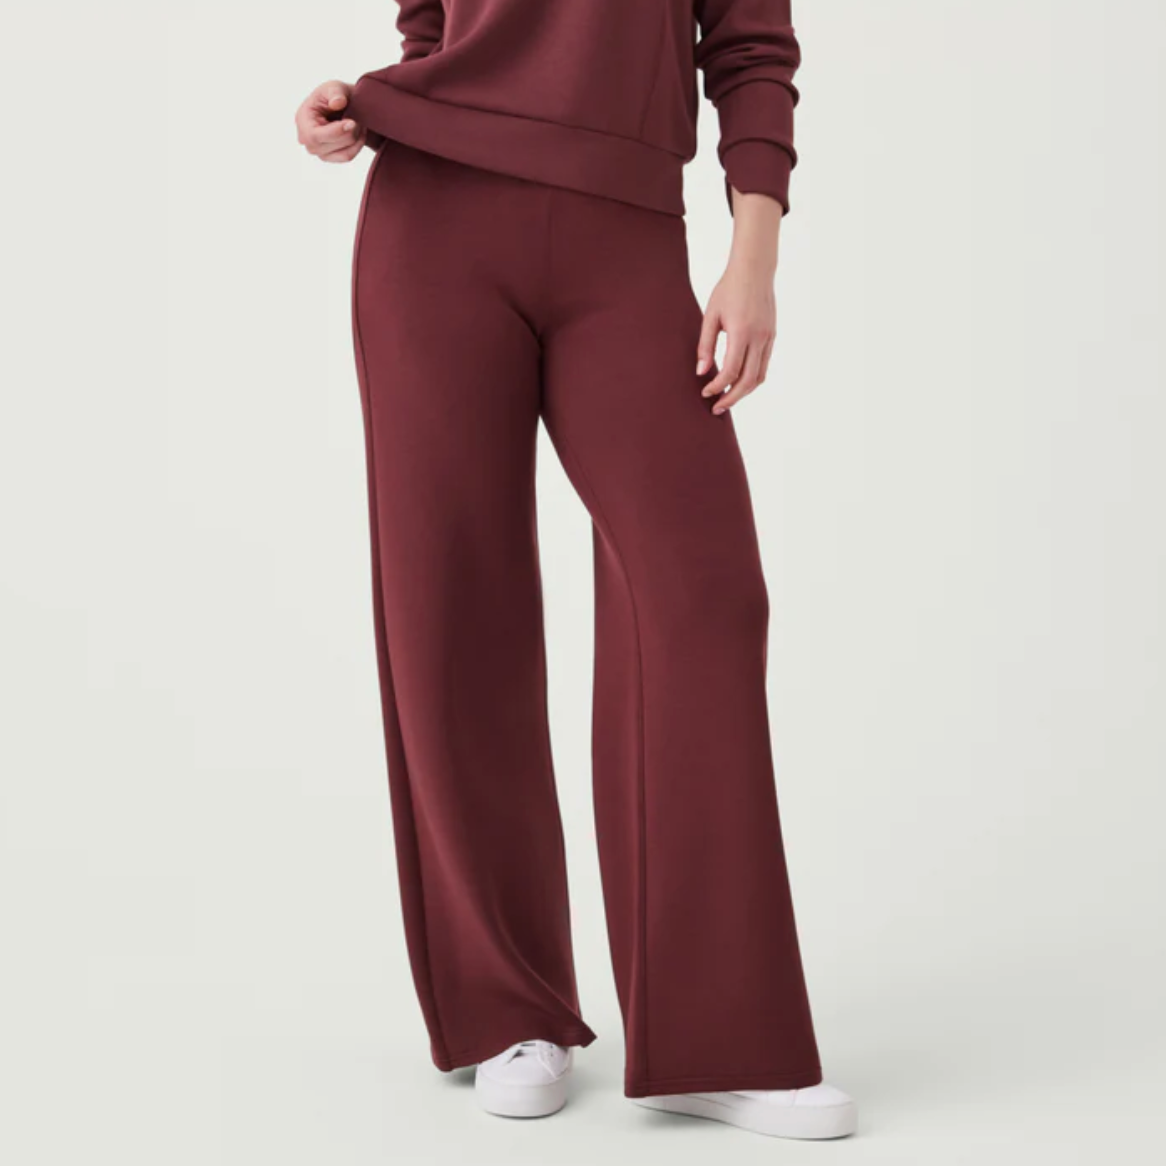 Spanx's New Pull-On Wide-Leg Jeans Are So Comfy and Flattering, I